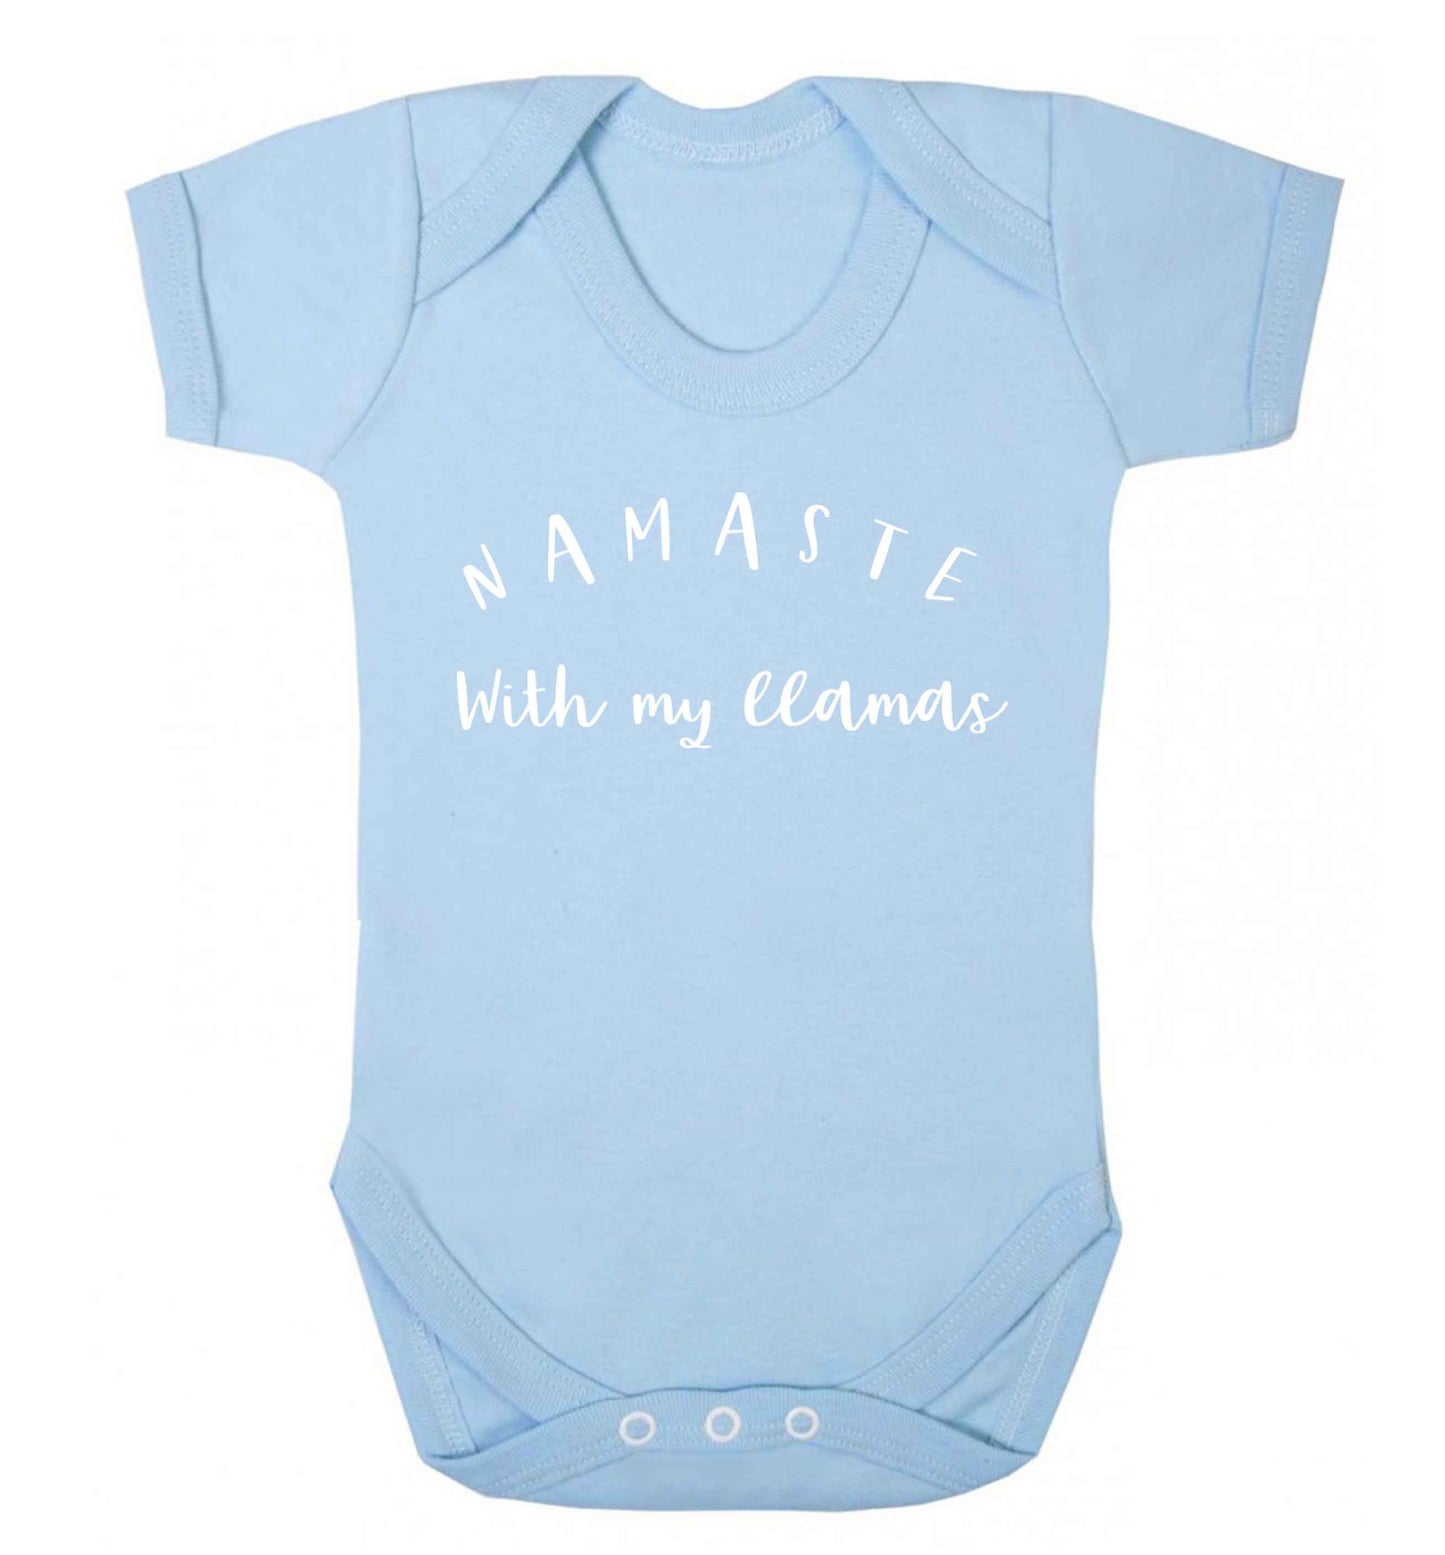 Namaste with my llamas Baby Vest pale blue 18-24 months